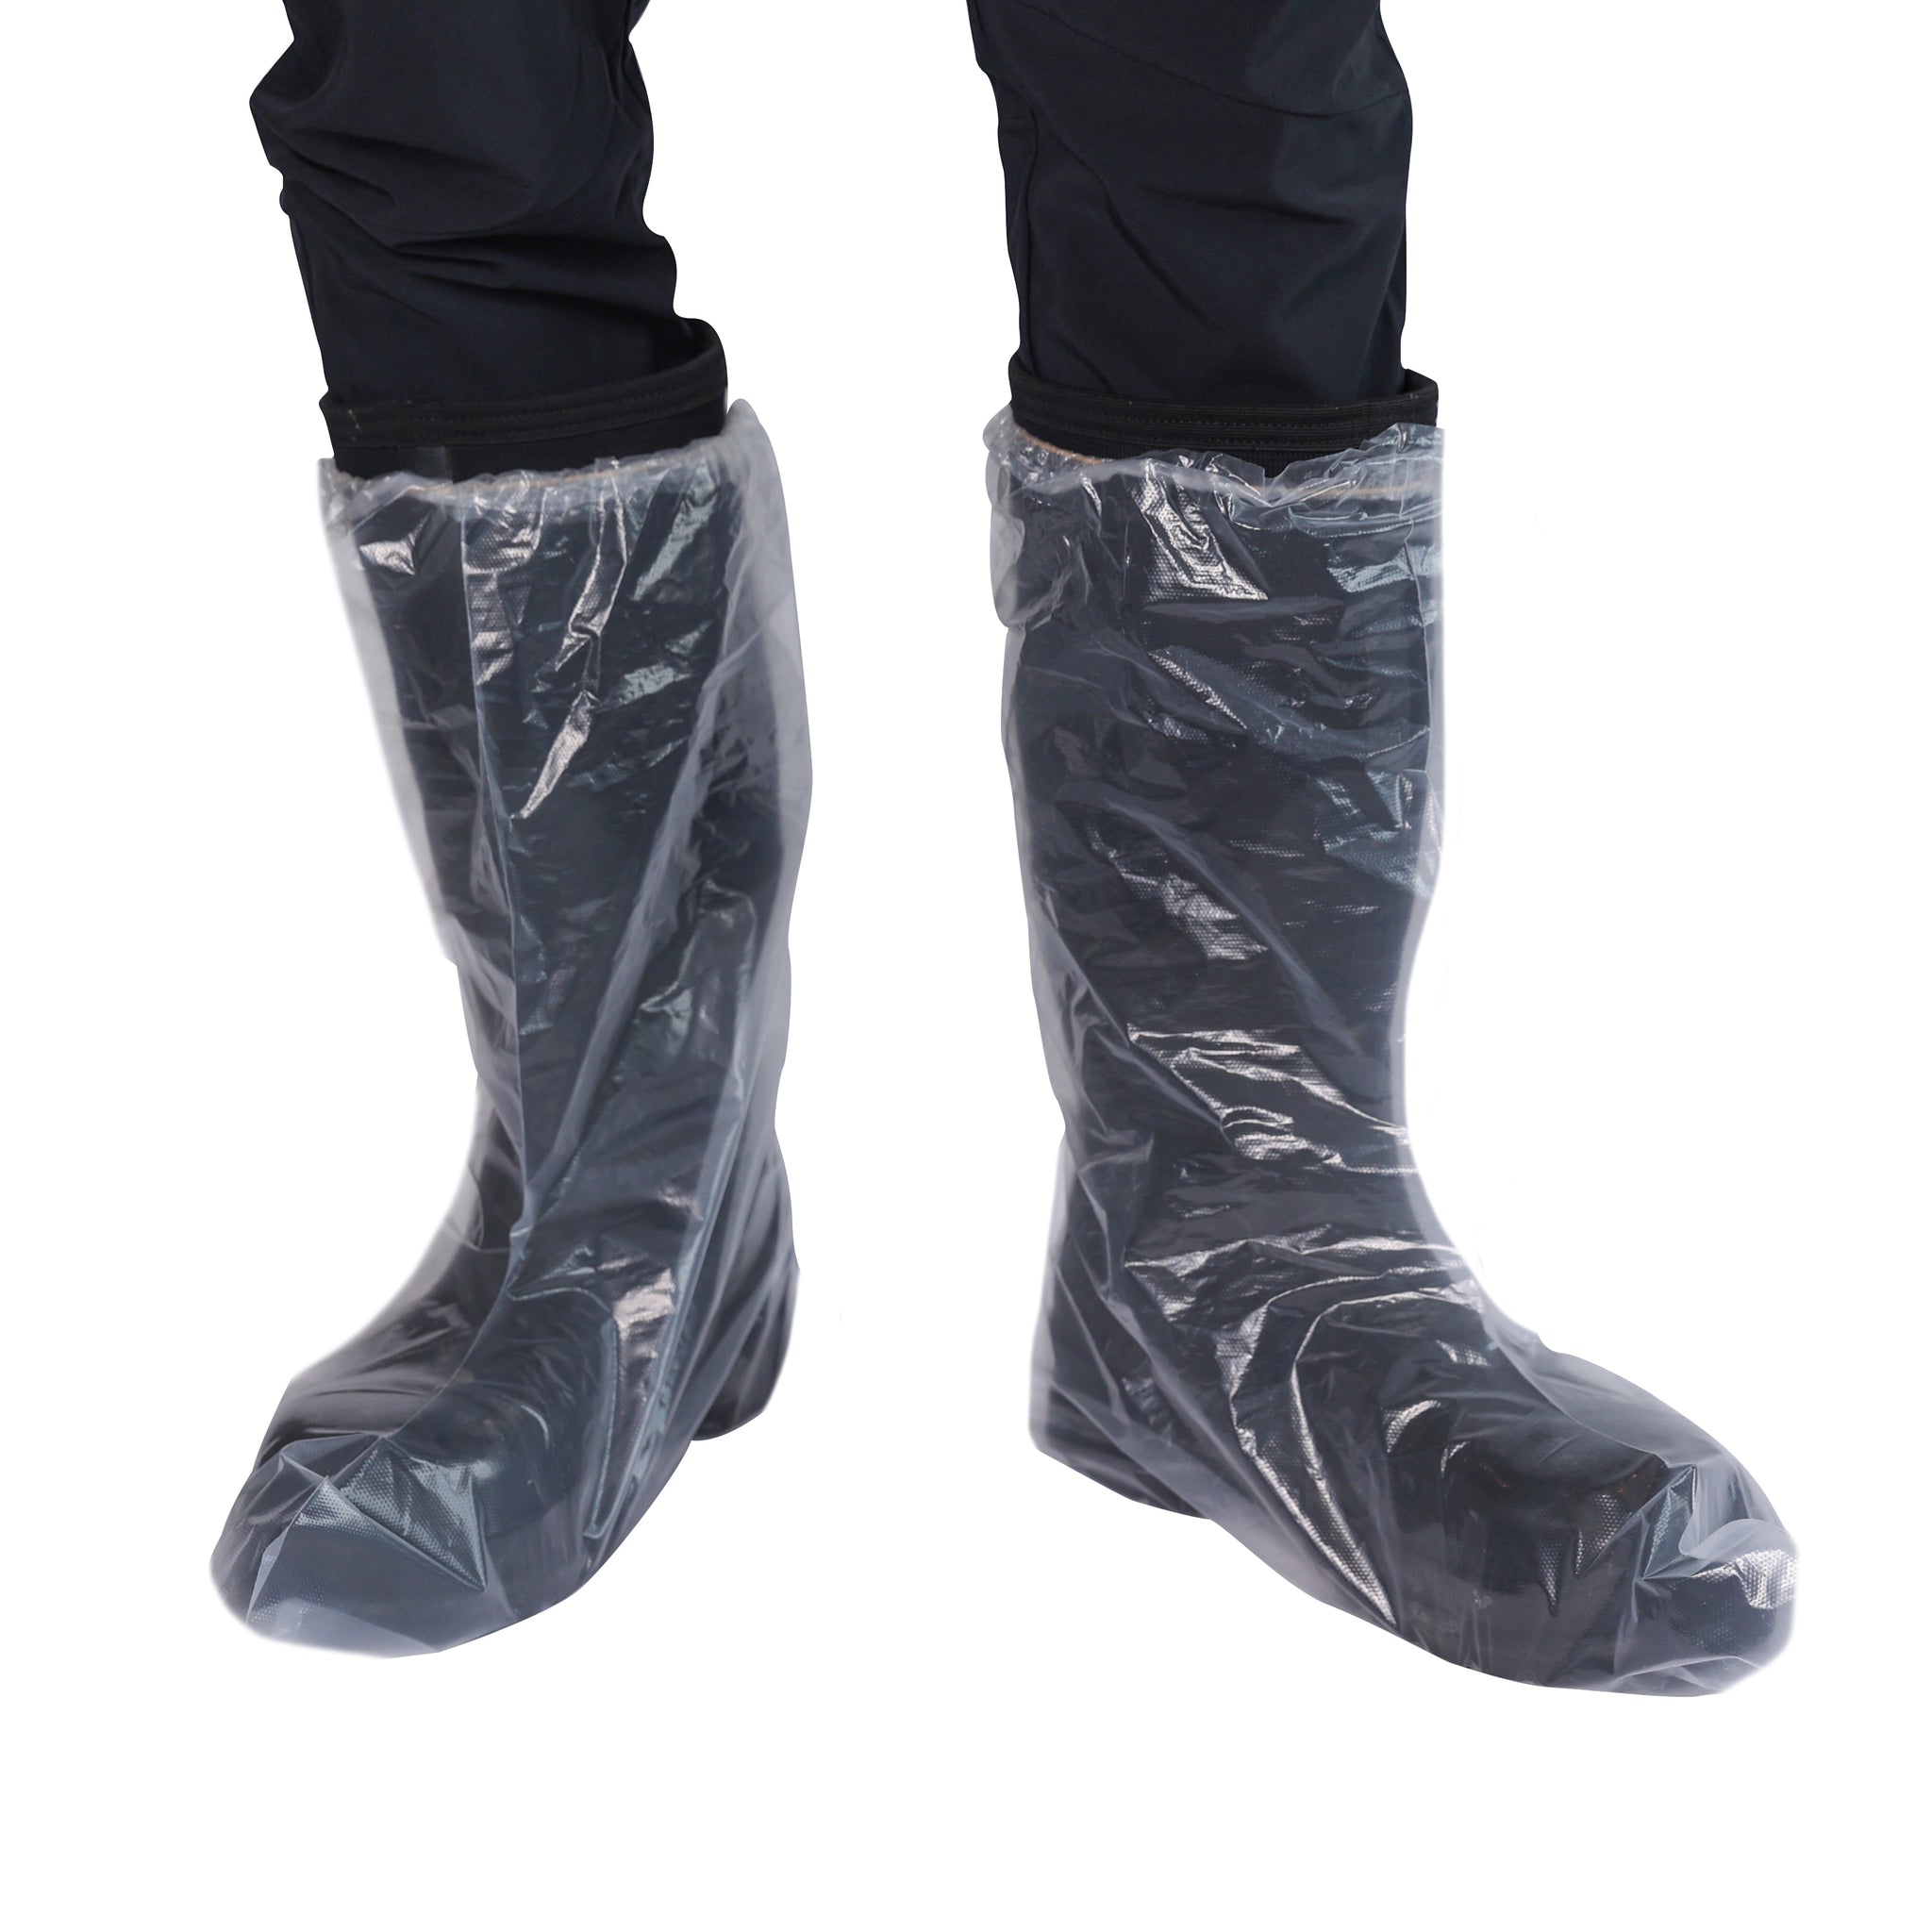 B75H7 Clear Polyethylene Boot Covers with Elastic Top